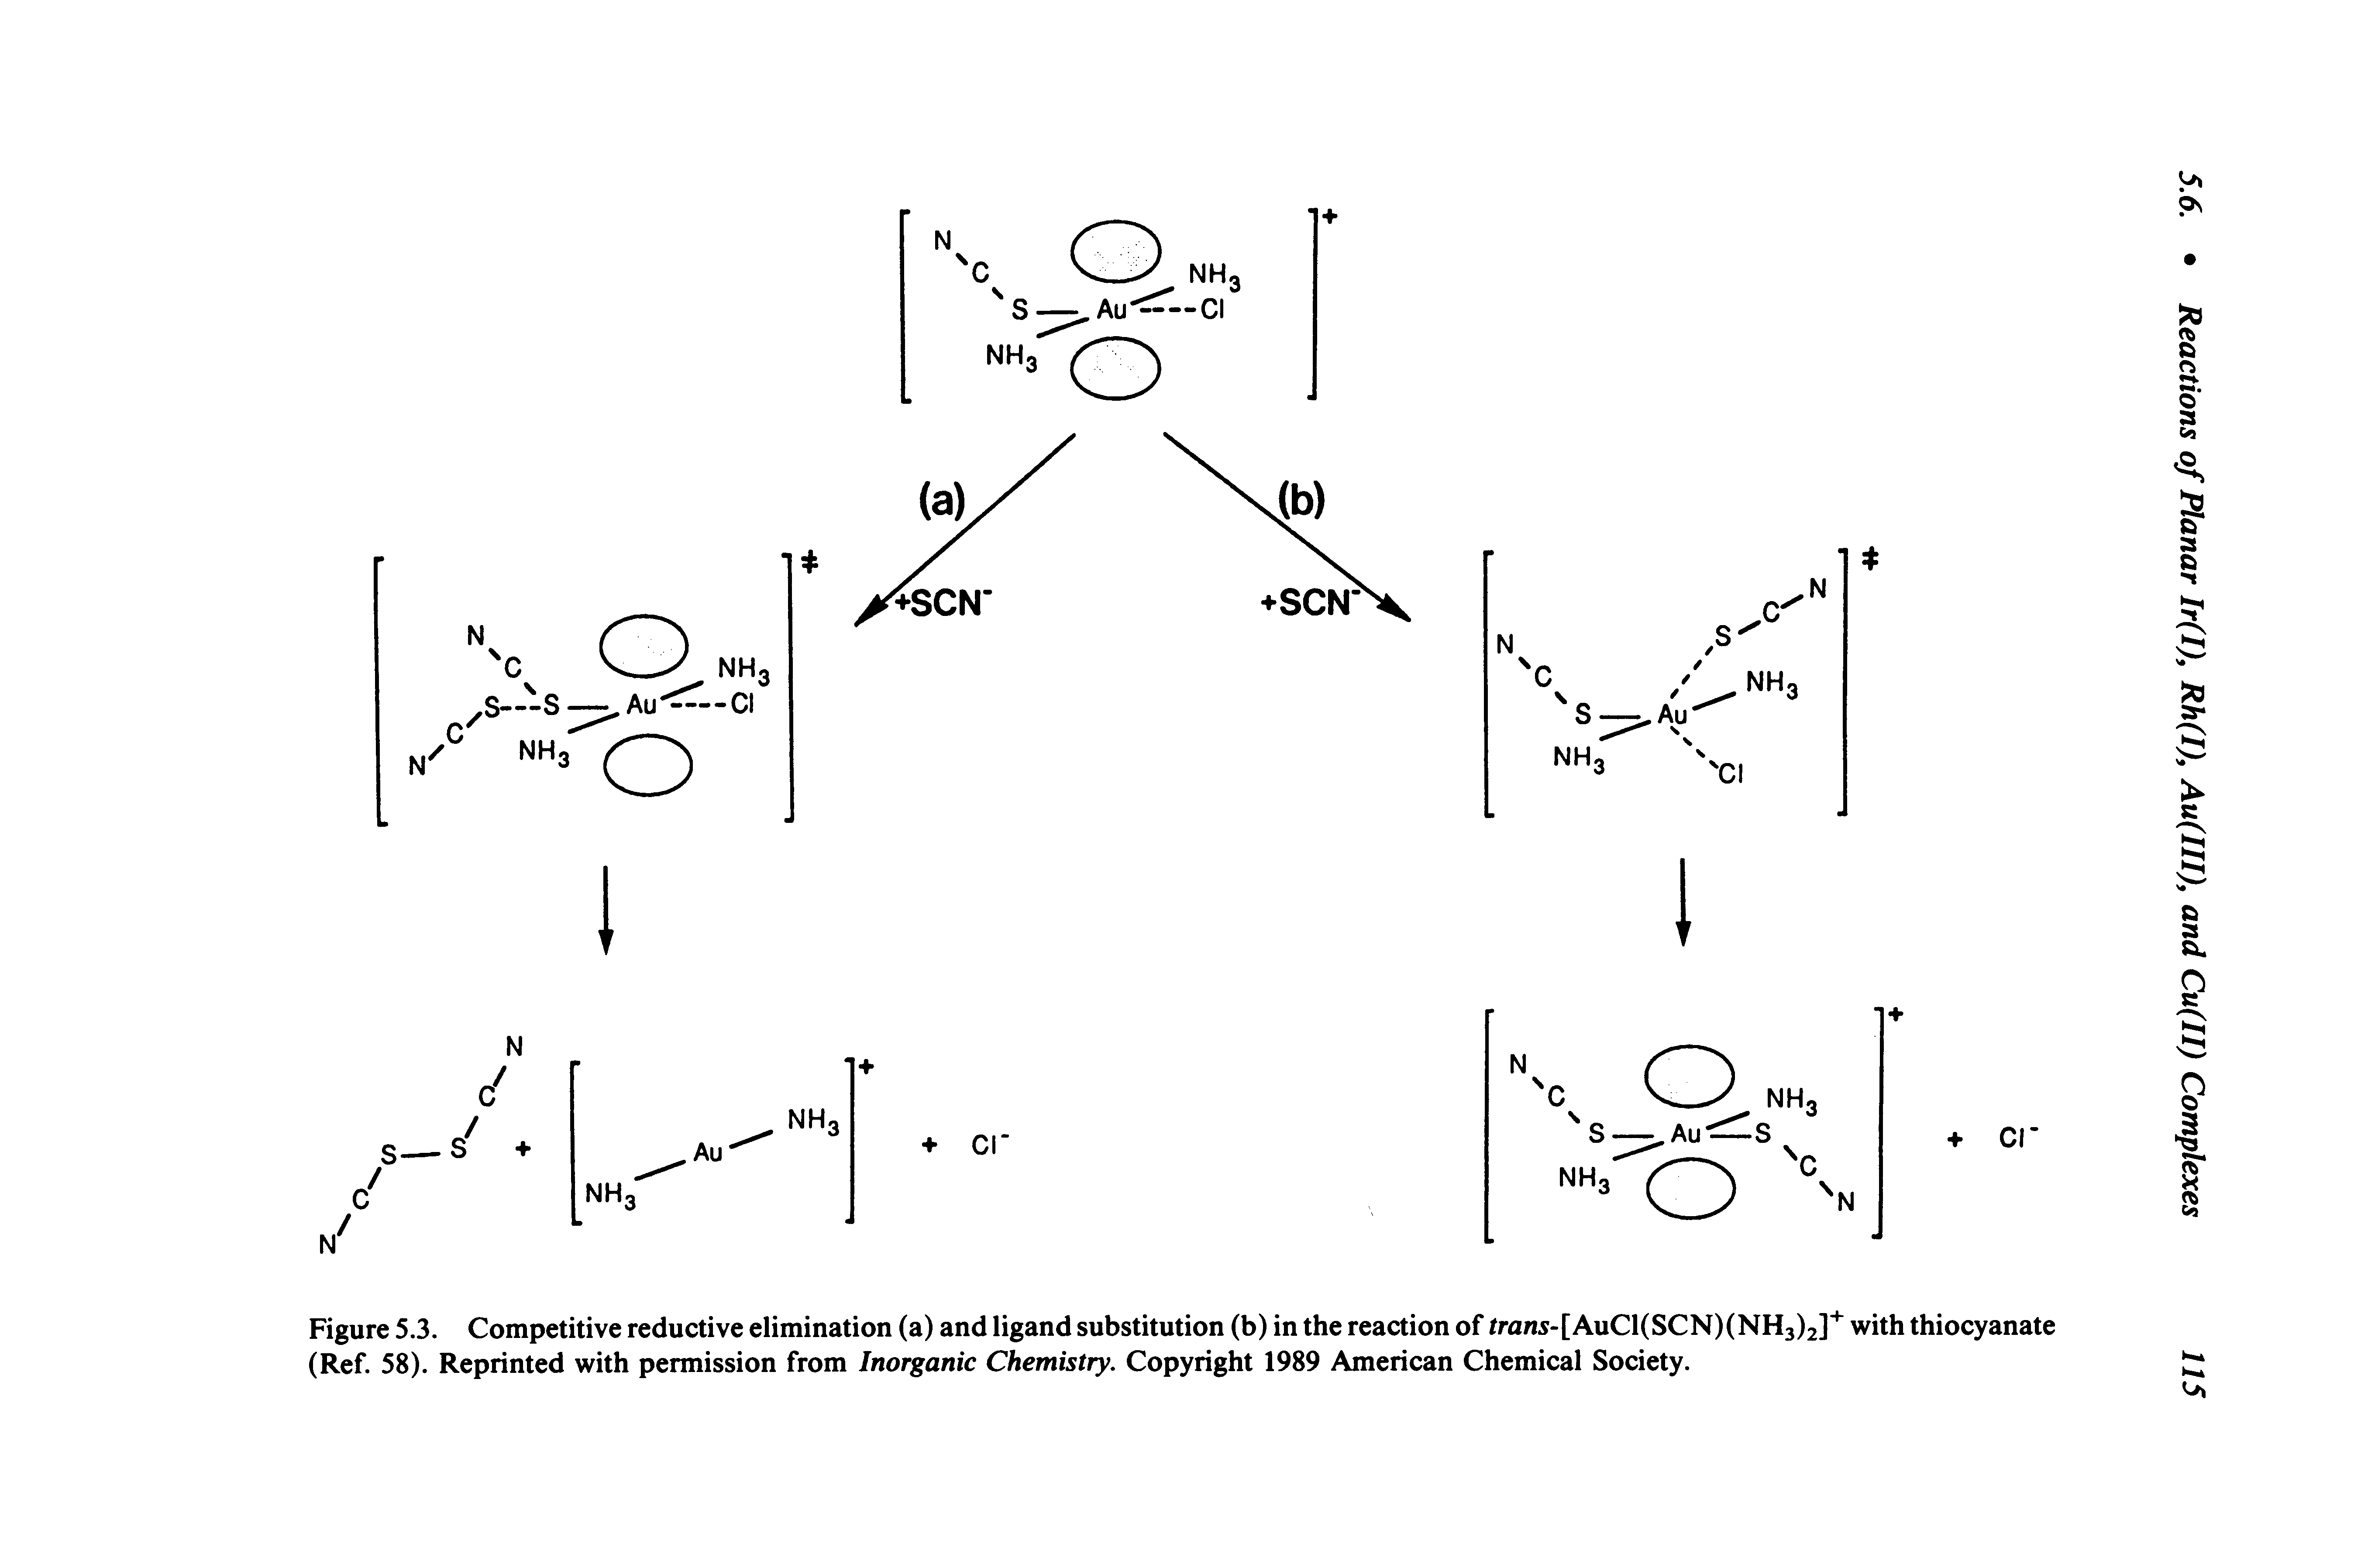 Figure 5.3. Competitive reductive elimination (a) and ligand substitution (b) in the reaction of/ra/i5-[AuCl(SCN)(NH3)2] with thiocyanate (Ref. 58). Reprinted with permission from Inorganic Chemistry. Copyright 1989 American Chemical Society.